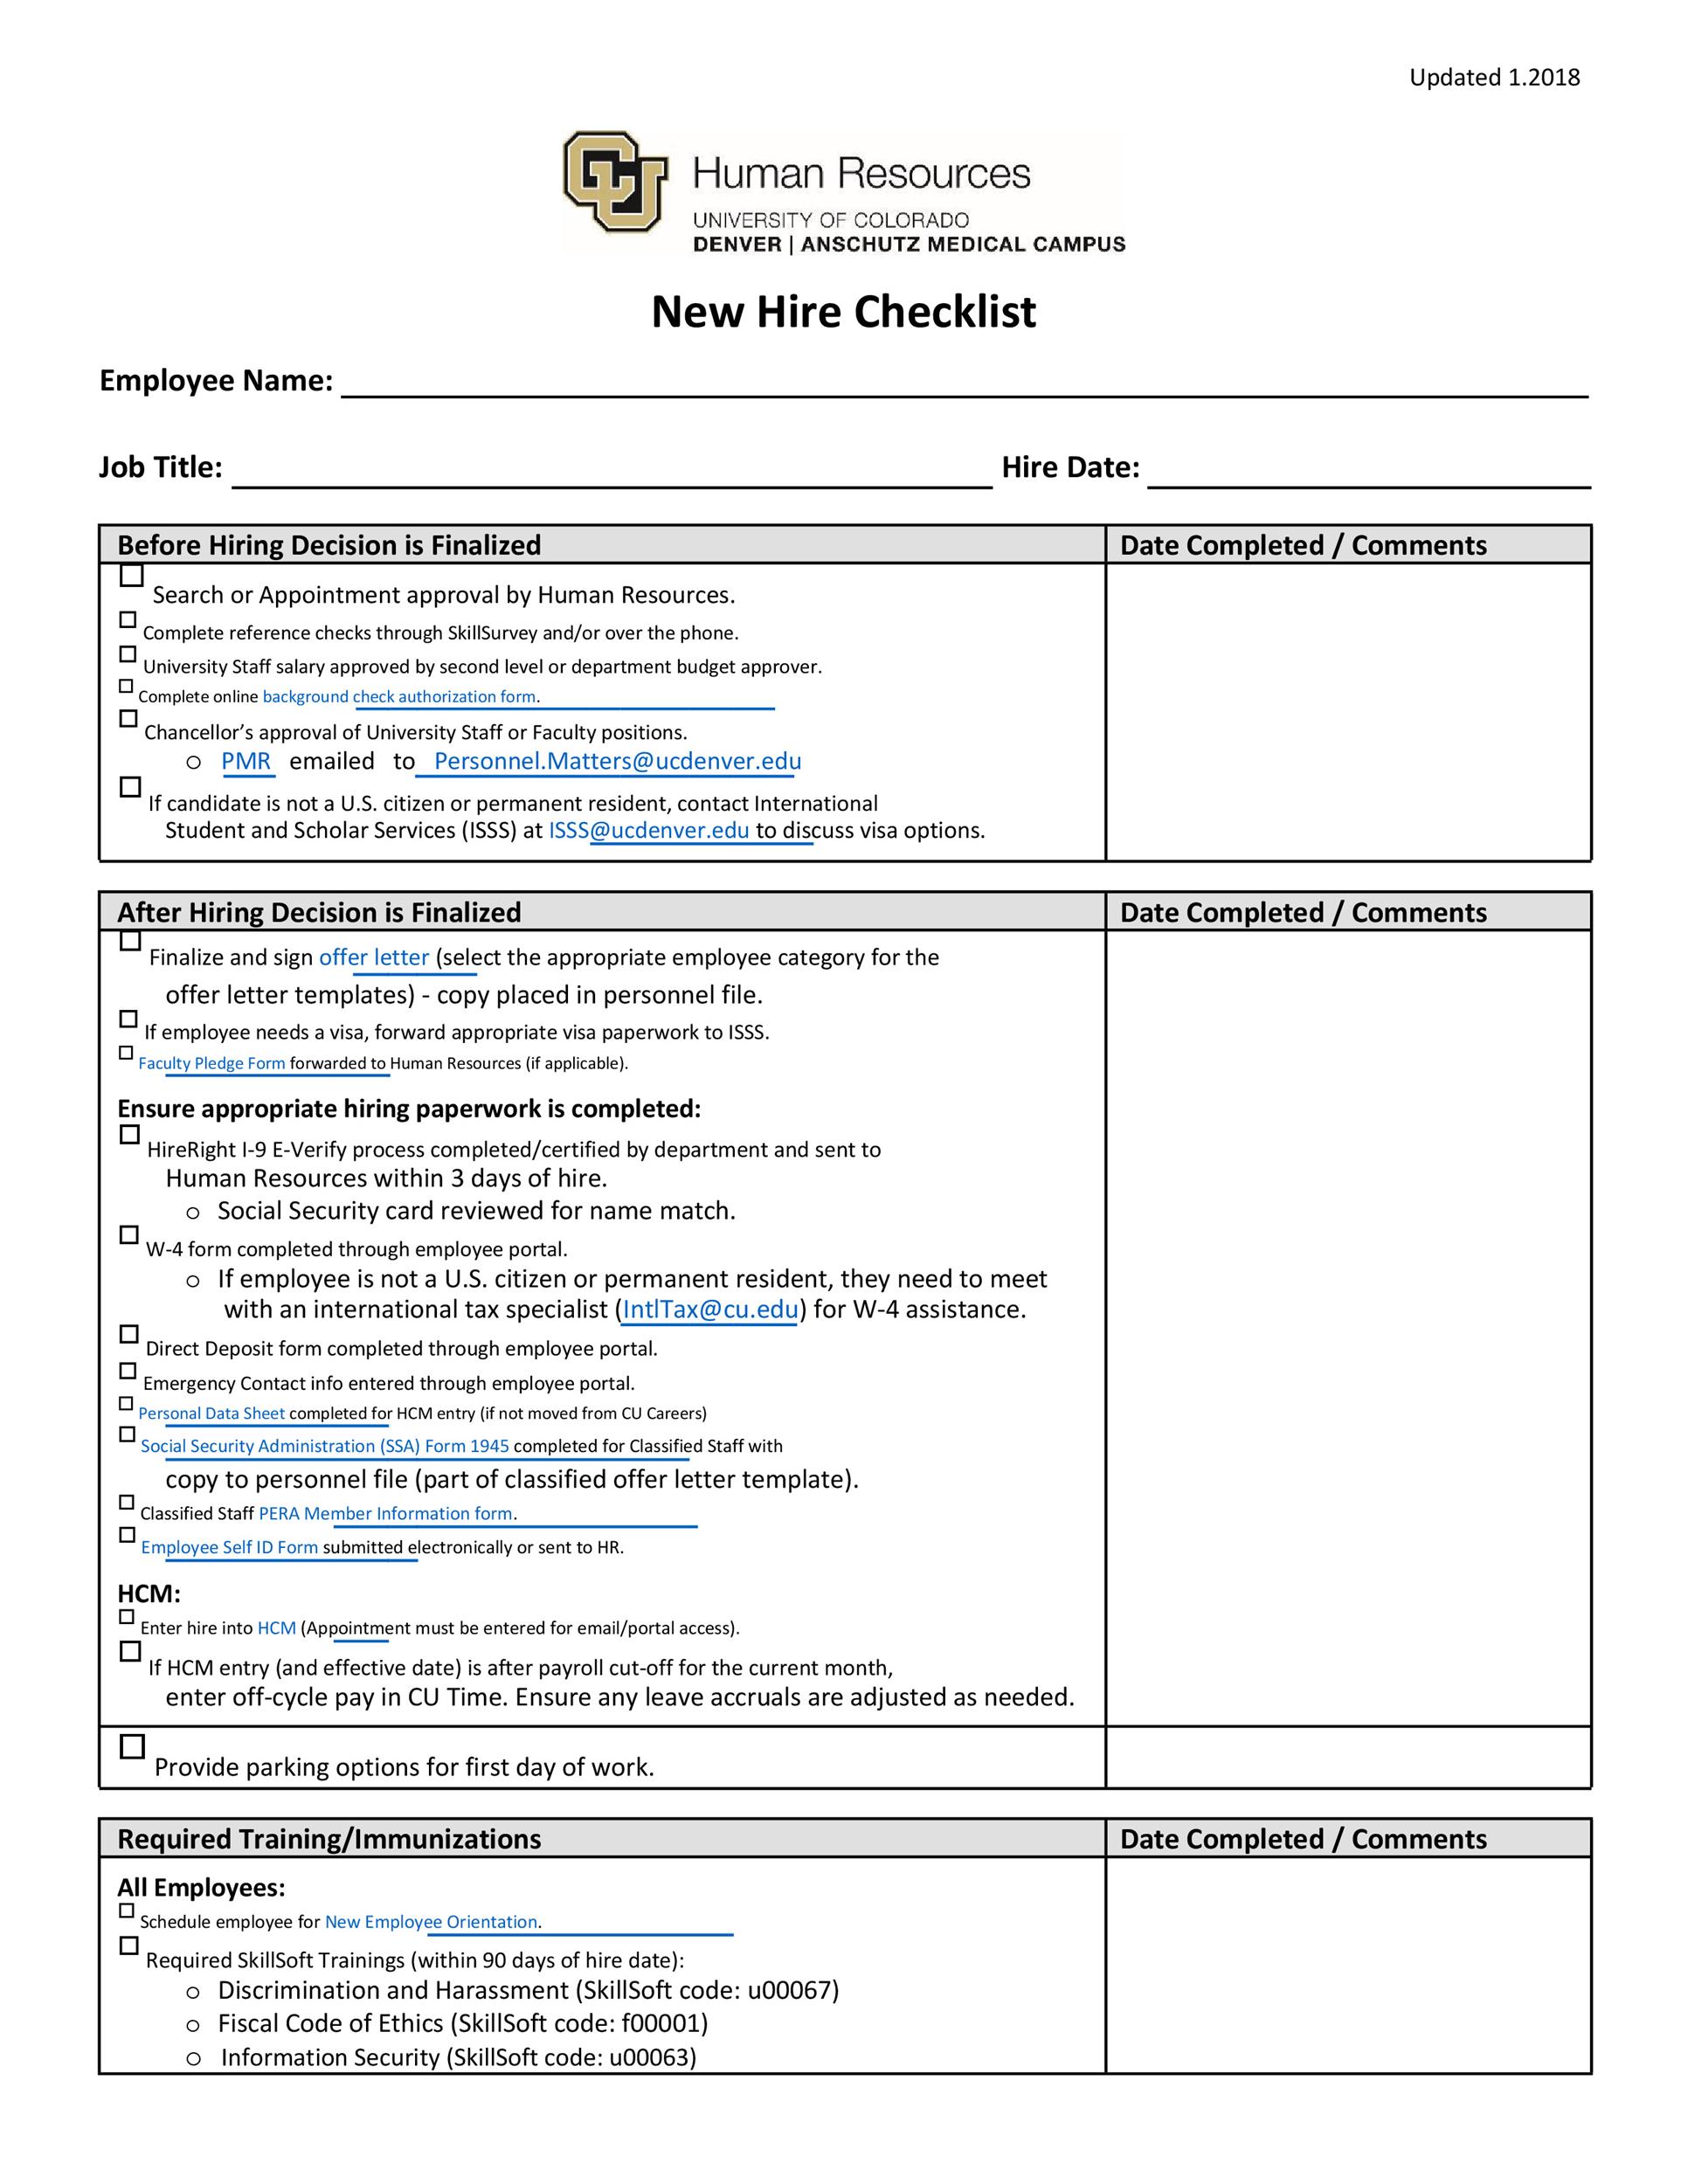 New Hire Paperwork Checklist Template from templatelab.com